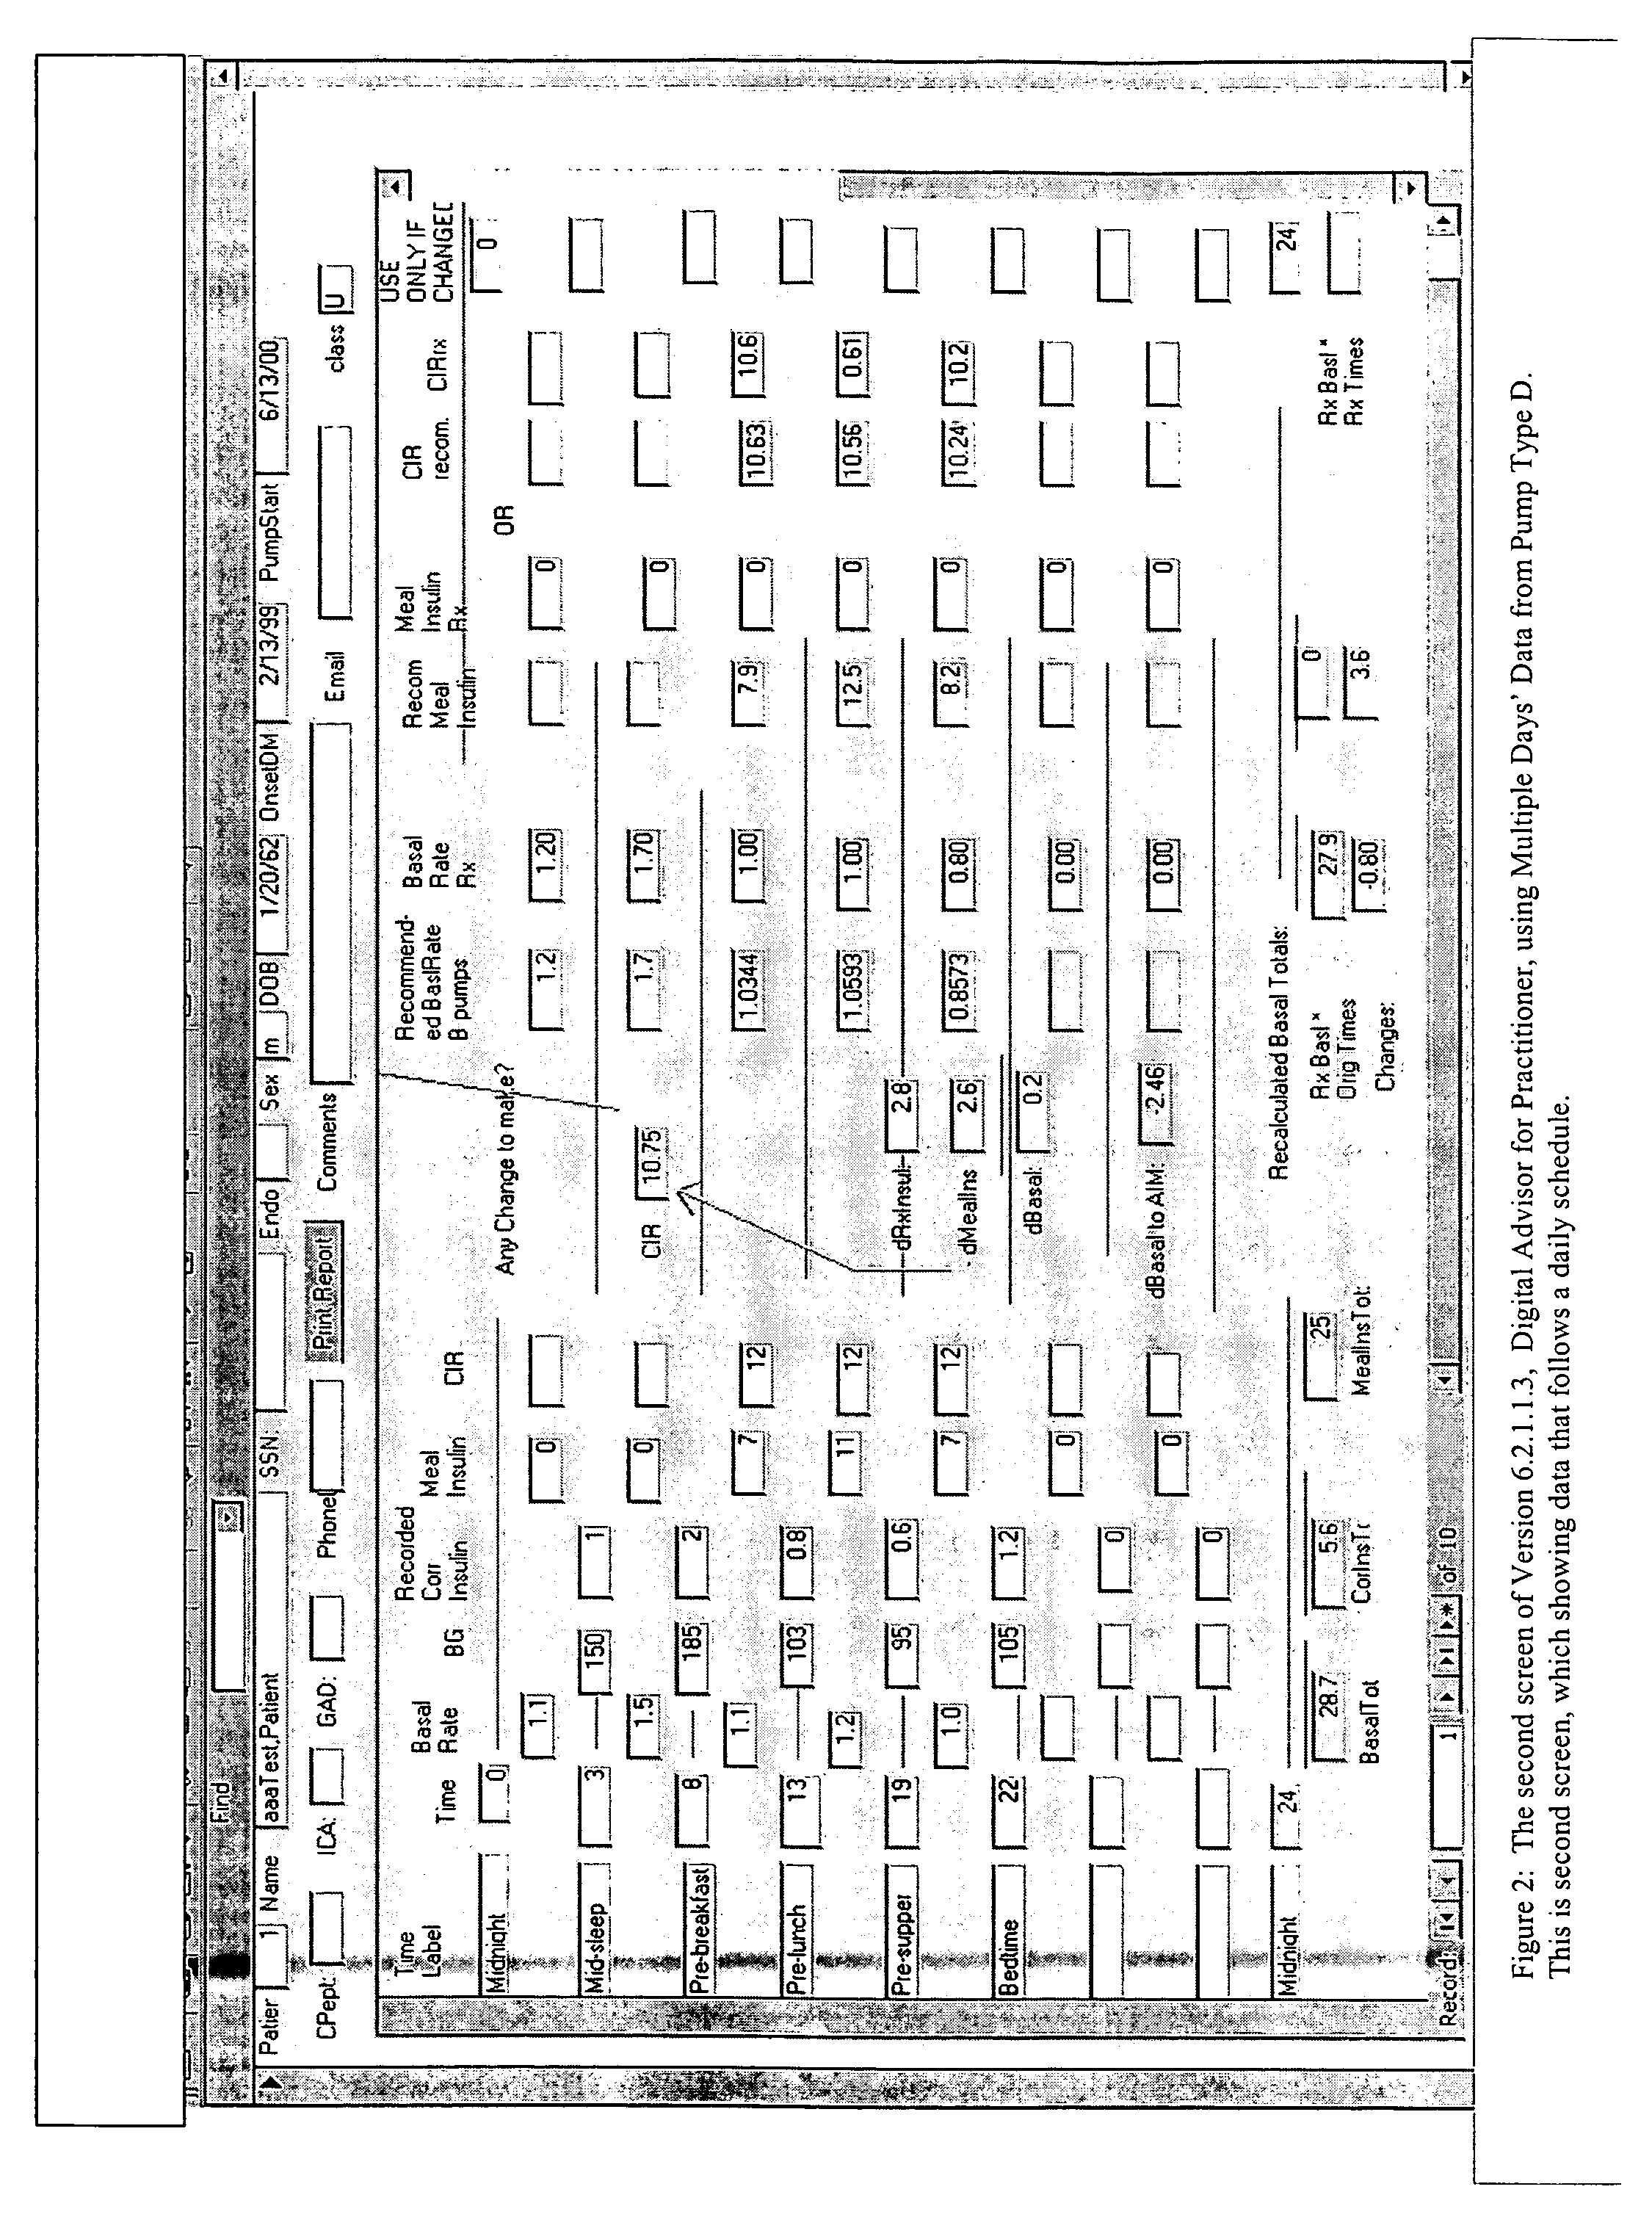 Method and system for determining insulin dosing schedules and carbohydrate-to-insulin ratios in diabetic patients